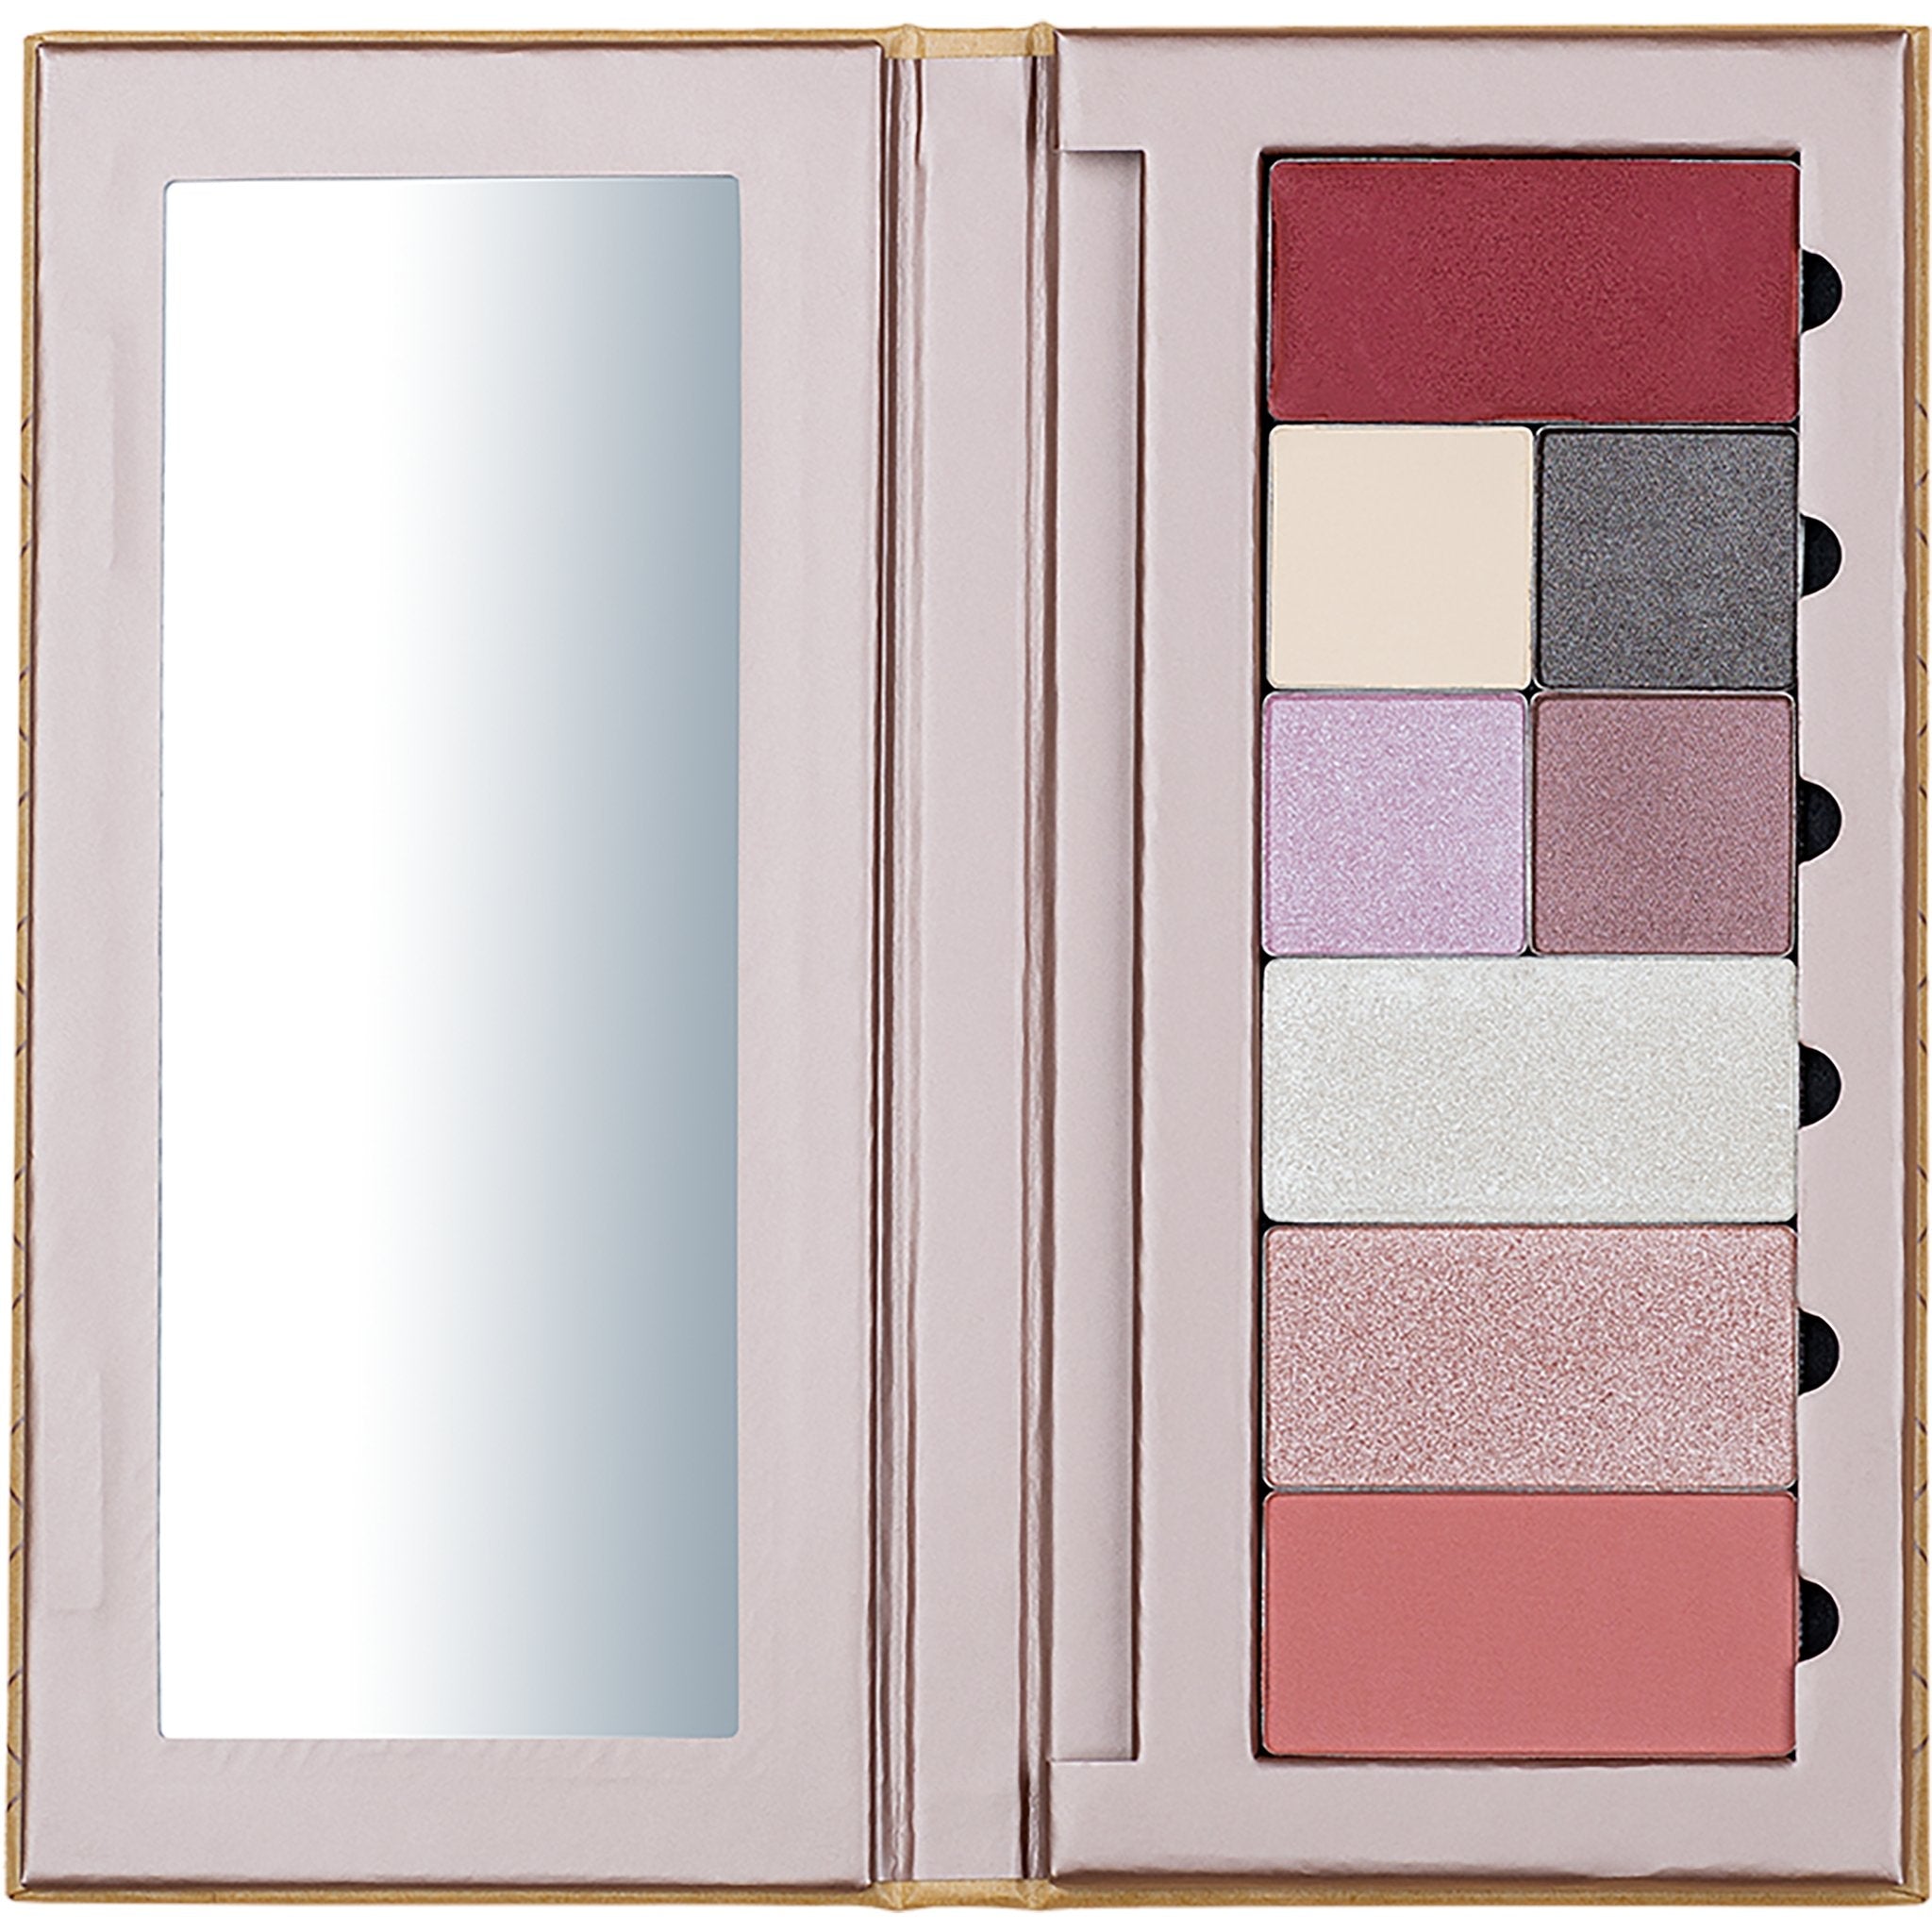 NEW Beauty ID - Stockholm Palette - mypure.co.uk